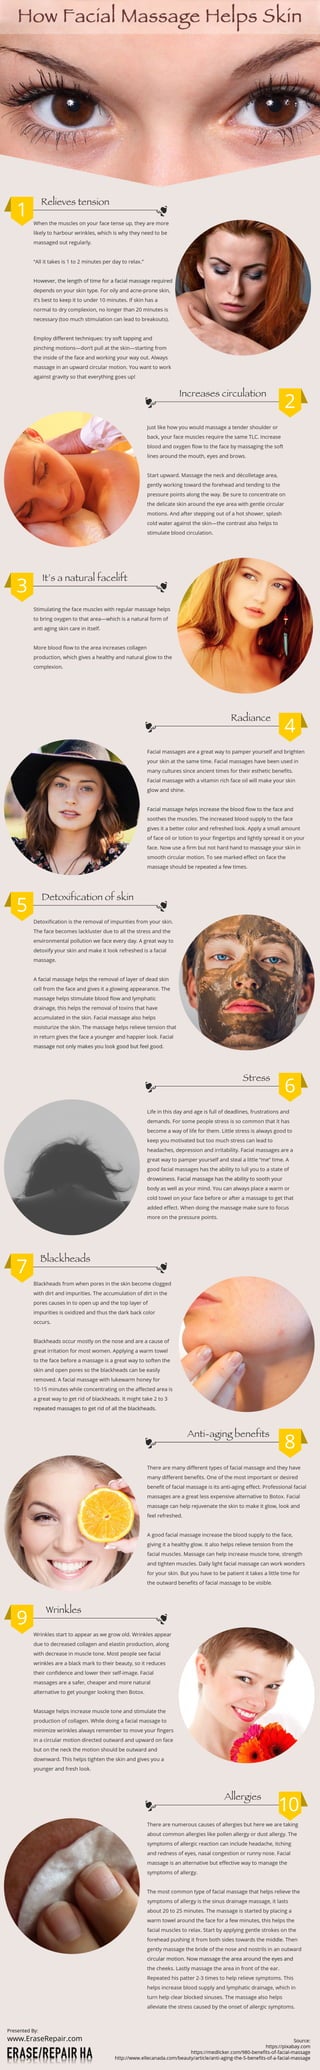 How Facial Massage Helps Skin